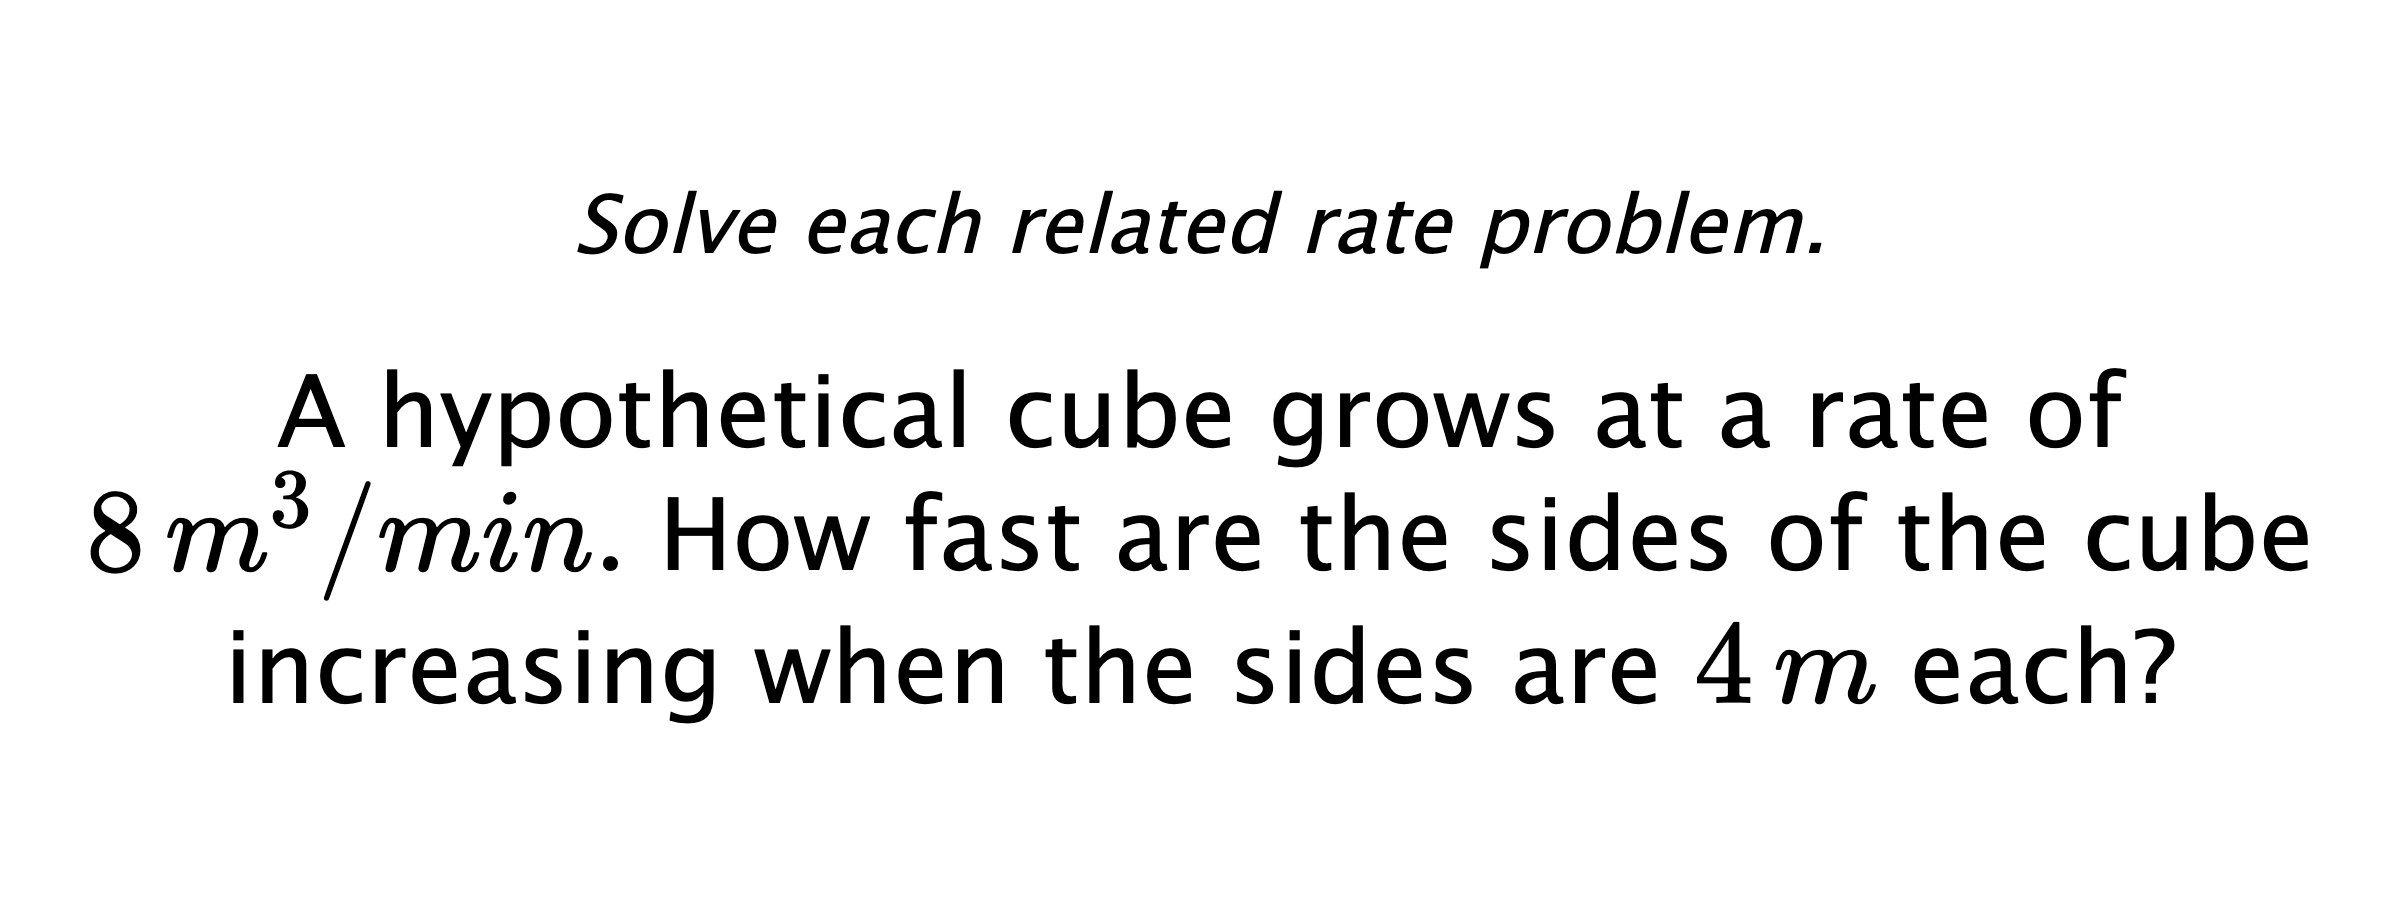 Solve each related rate problem. A hypothetical cube grows at a rate of $8 \,m^{3}/min.$ How fast are the sides of the cube increasing when the sides are $4\,m$ each?